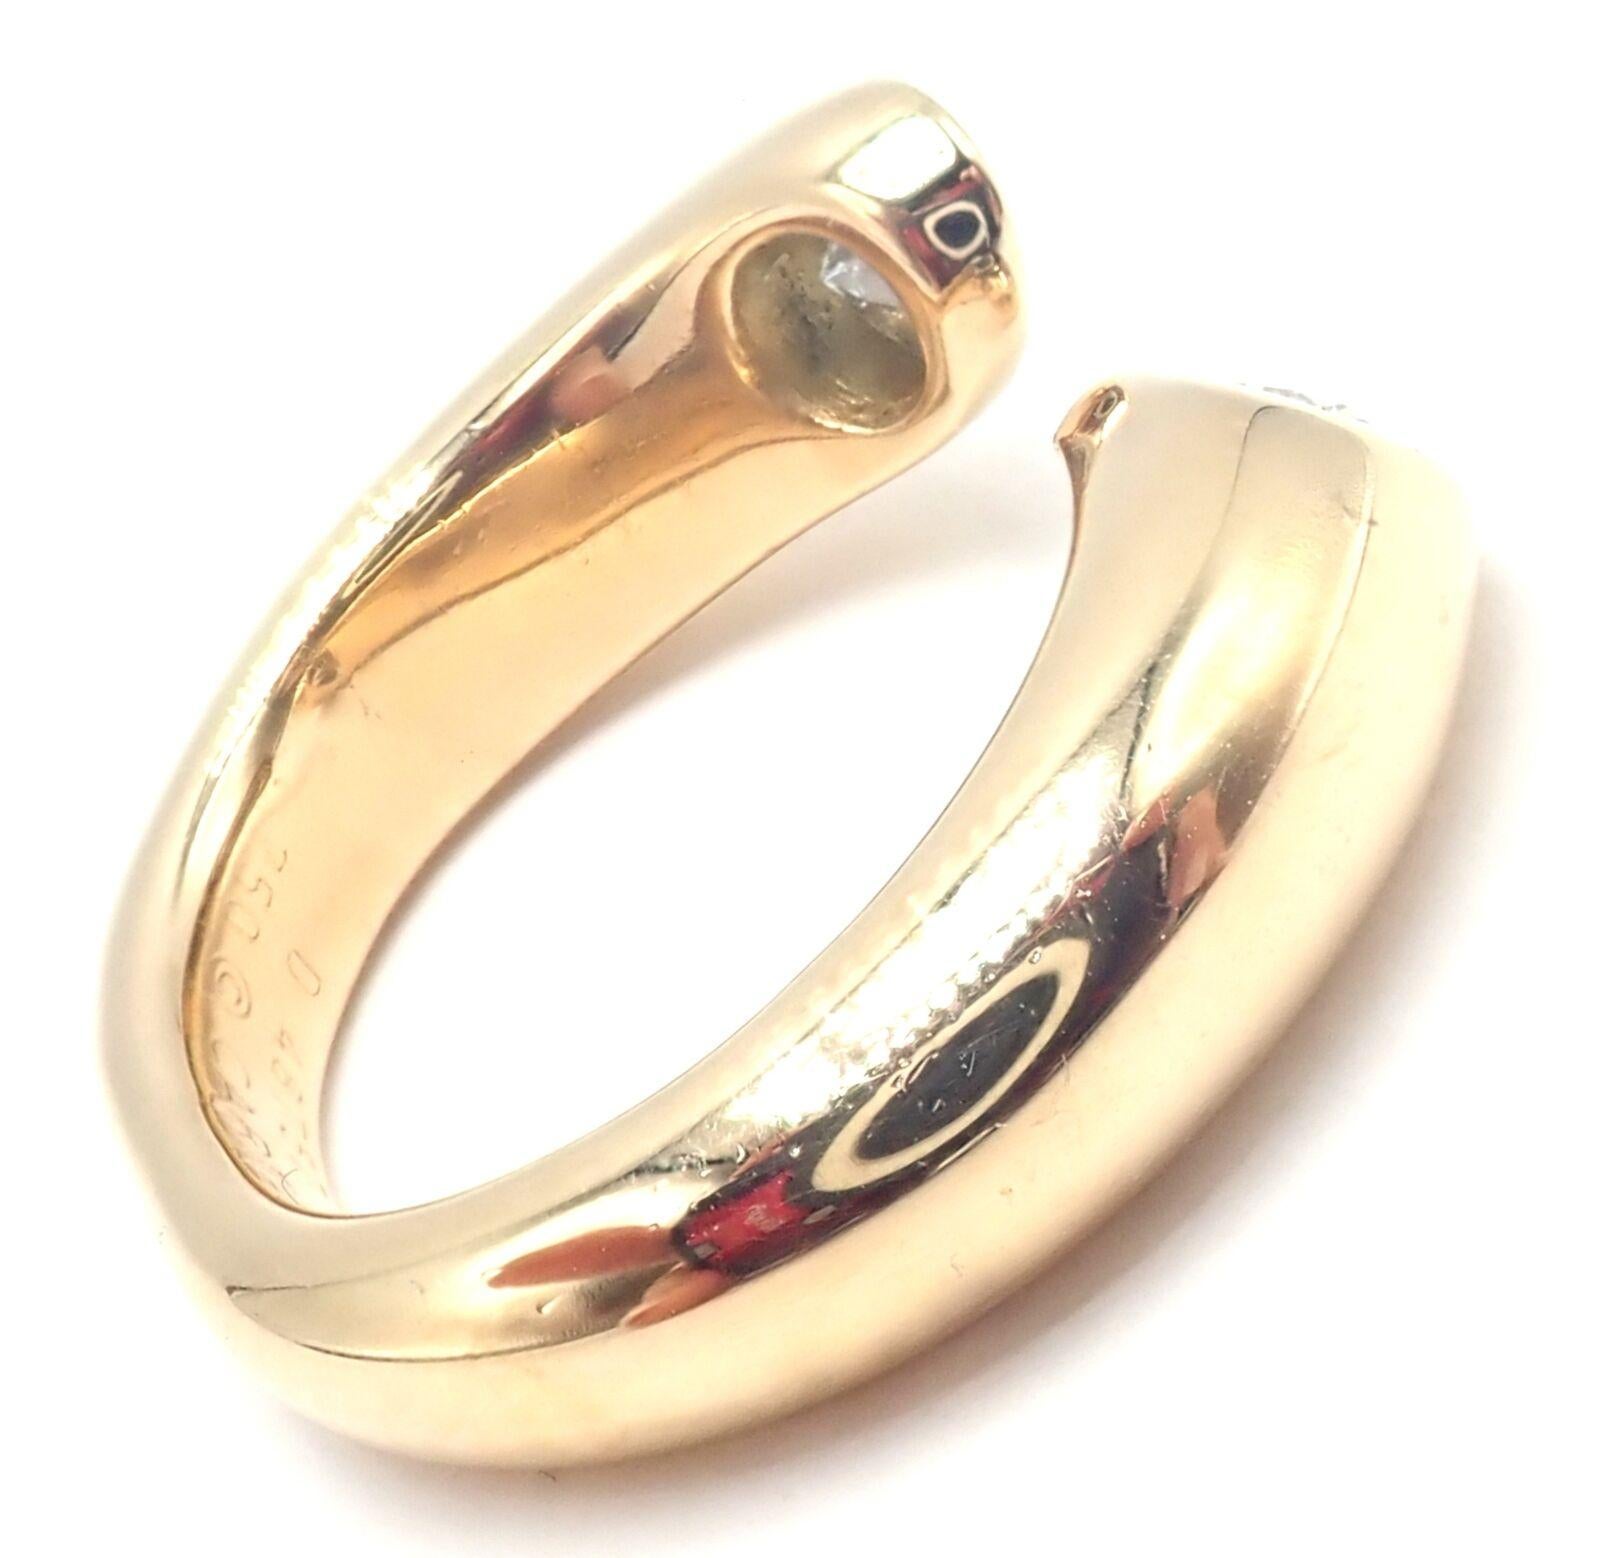 18k Yellow Gold Ellipse Deux Tetes Croisees Bypass Diamond Band Ring by Cartier.
With 2 oval cut diamonds VS1 clarity, G color total weight approximately 1.20ct
Embrace the pinnacle of luxury with Cartier's 18k Yellow Gold Diamond Ellipse Deux Tetes